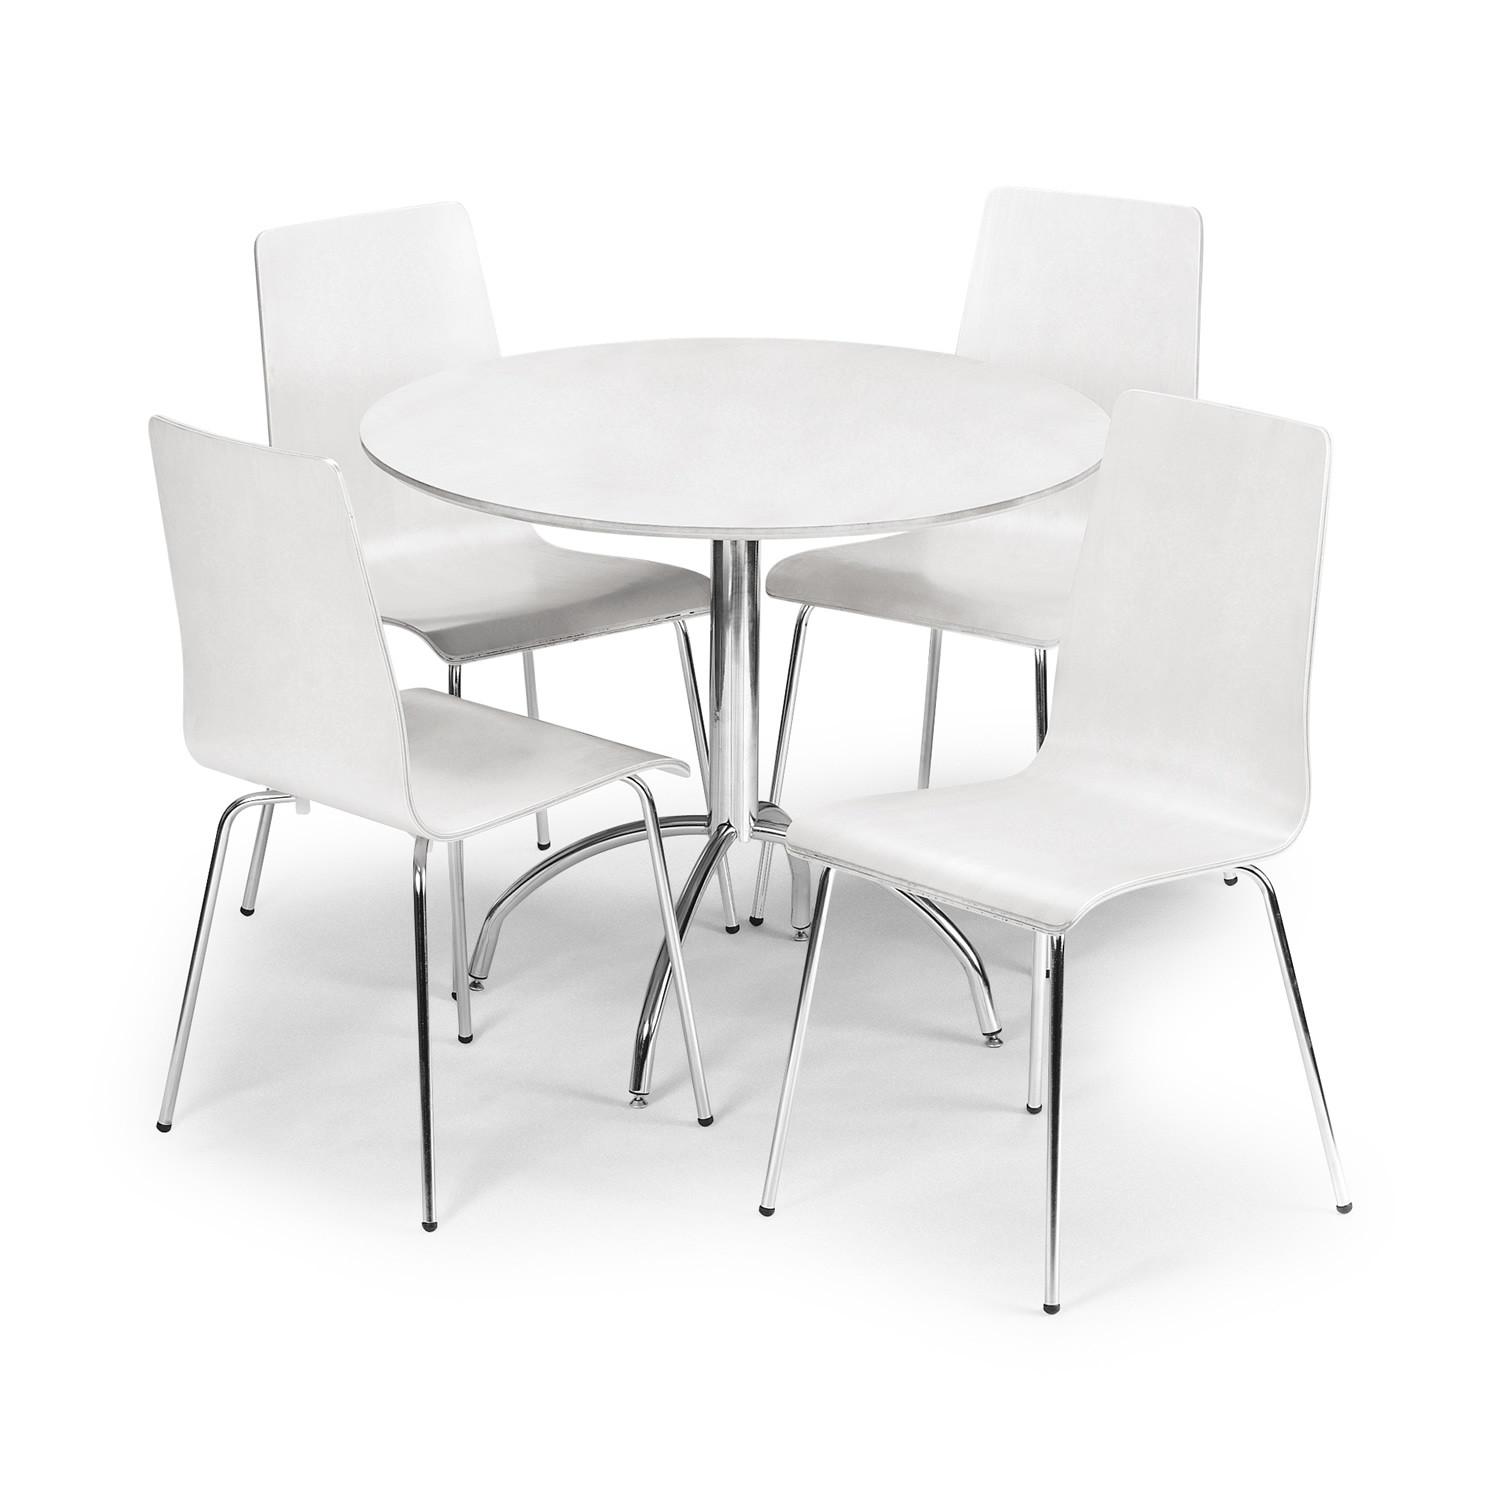 Round White Kitchen Table Sets
 Beautiful White Round Kitchen Table and Chairs – HomesFeed